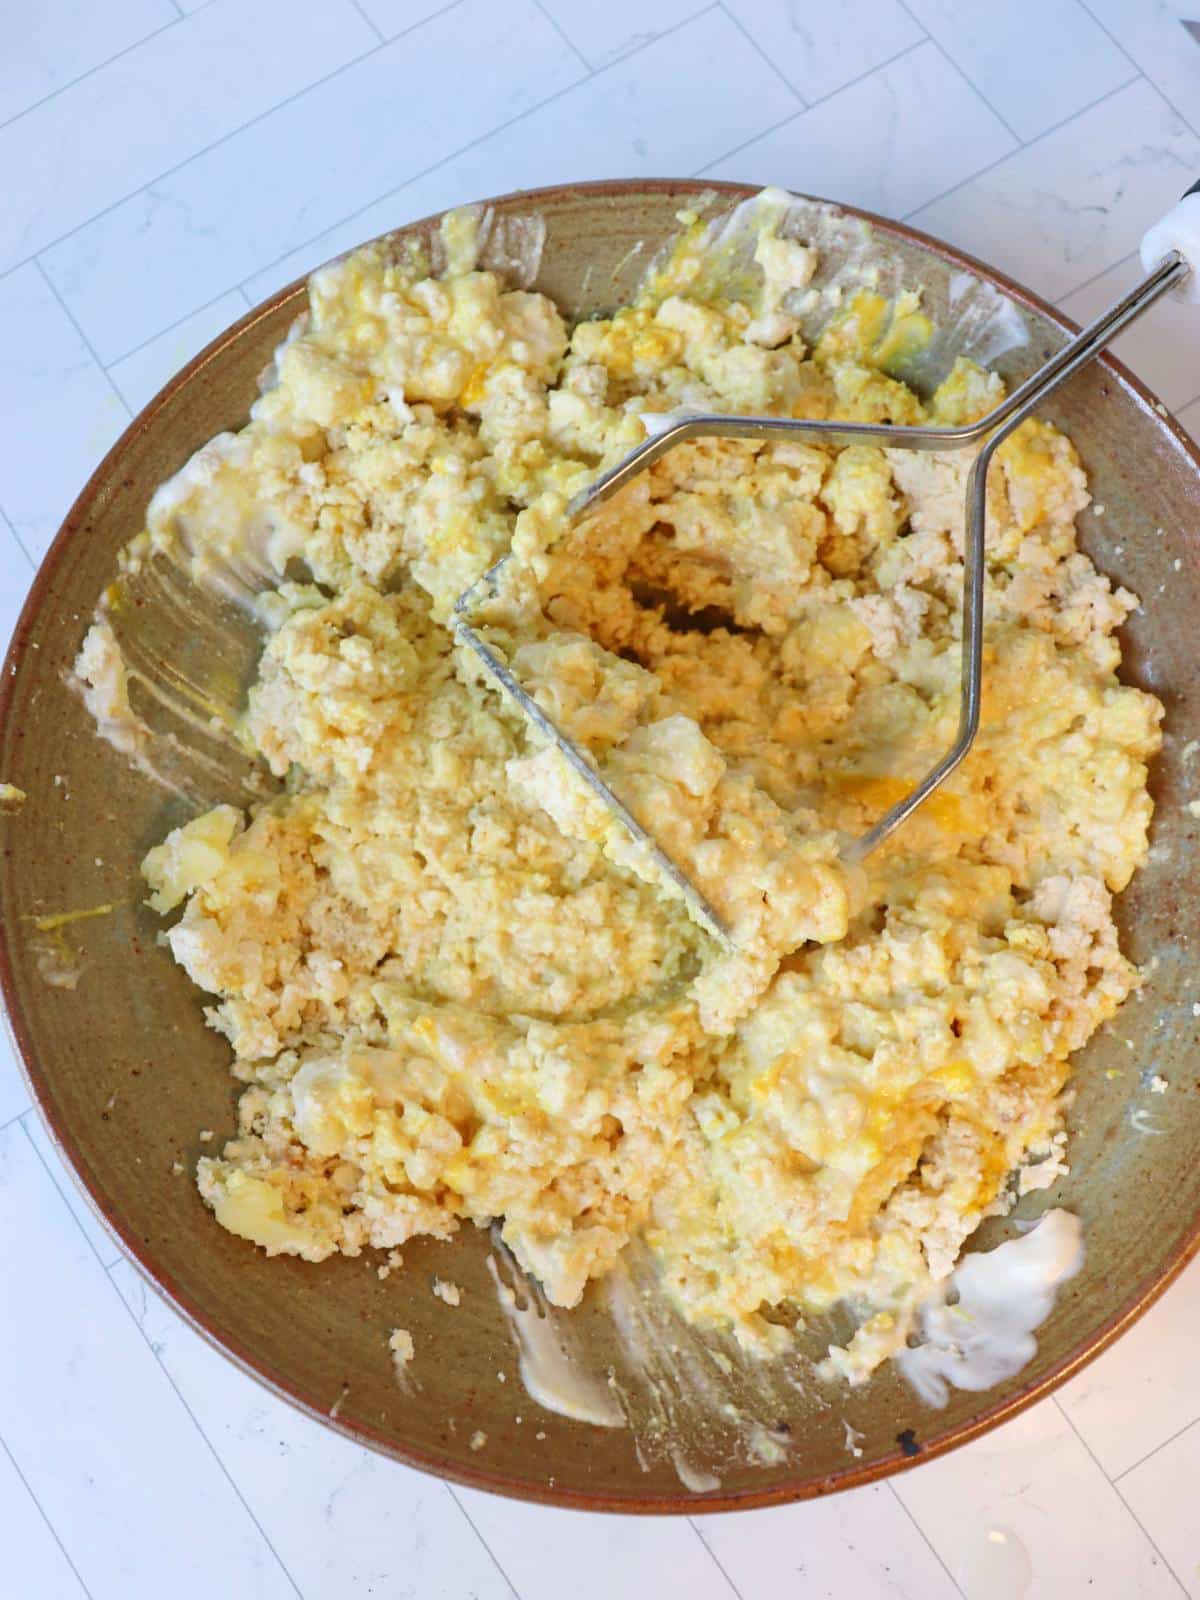 Vegan deviled egg filling in a mixing bowl with a potato masher.